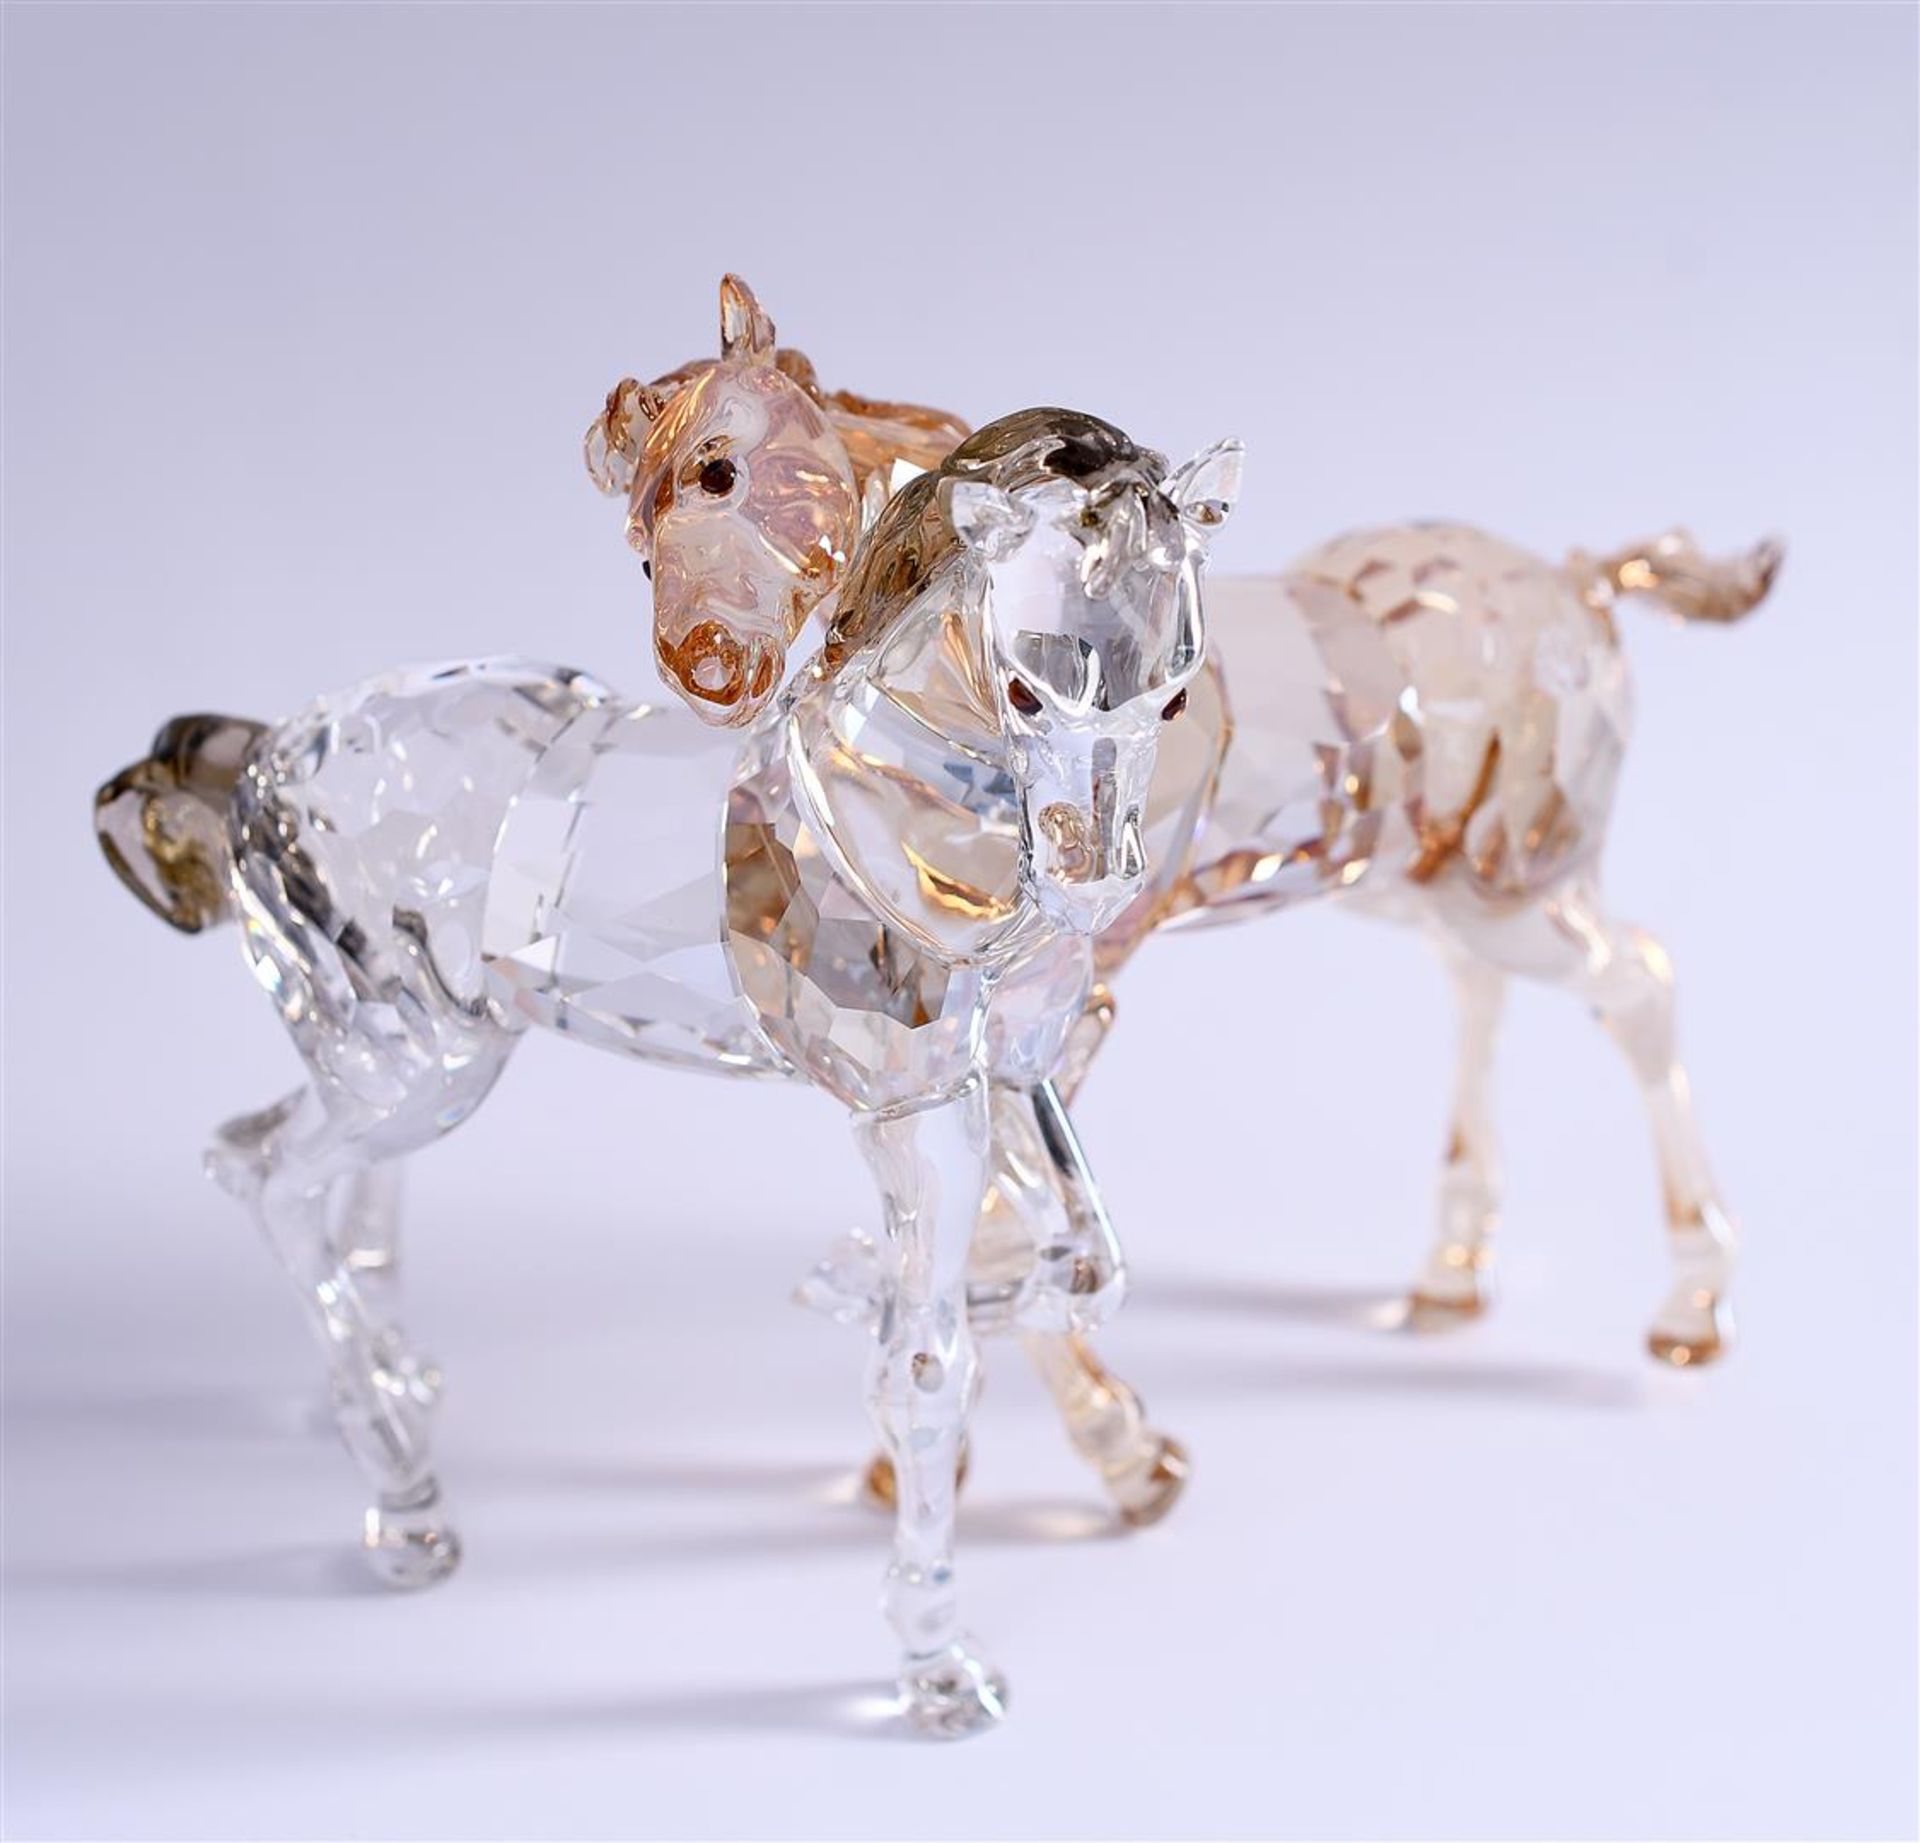 Swarovski, Foals, Year of issue 2012,1121627. Includes original box.
11,9 x 9,2 cm. - Image 7 of 8